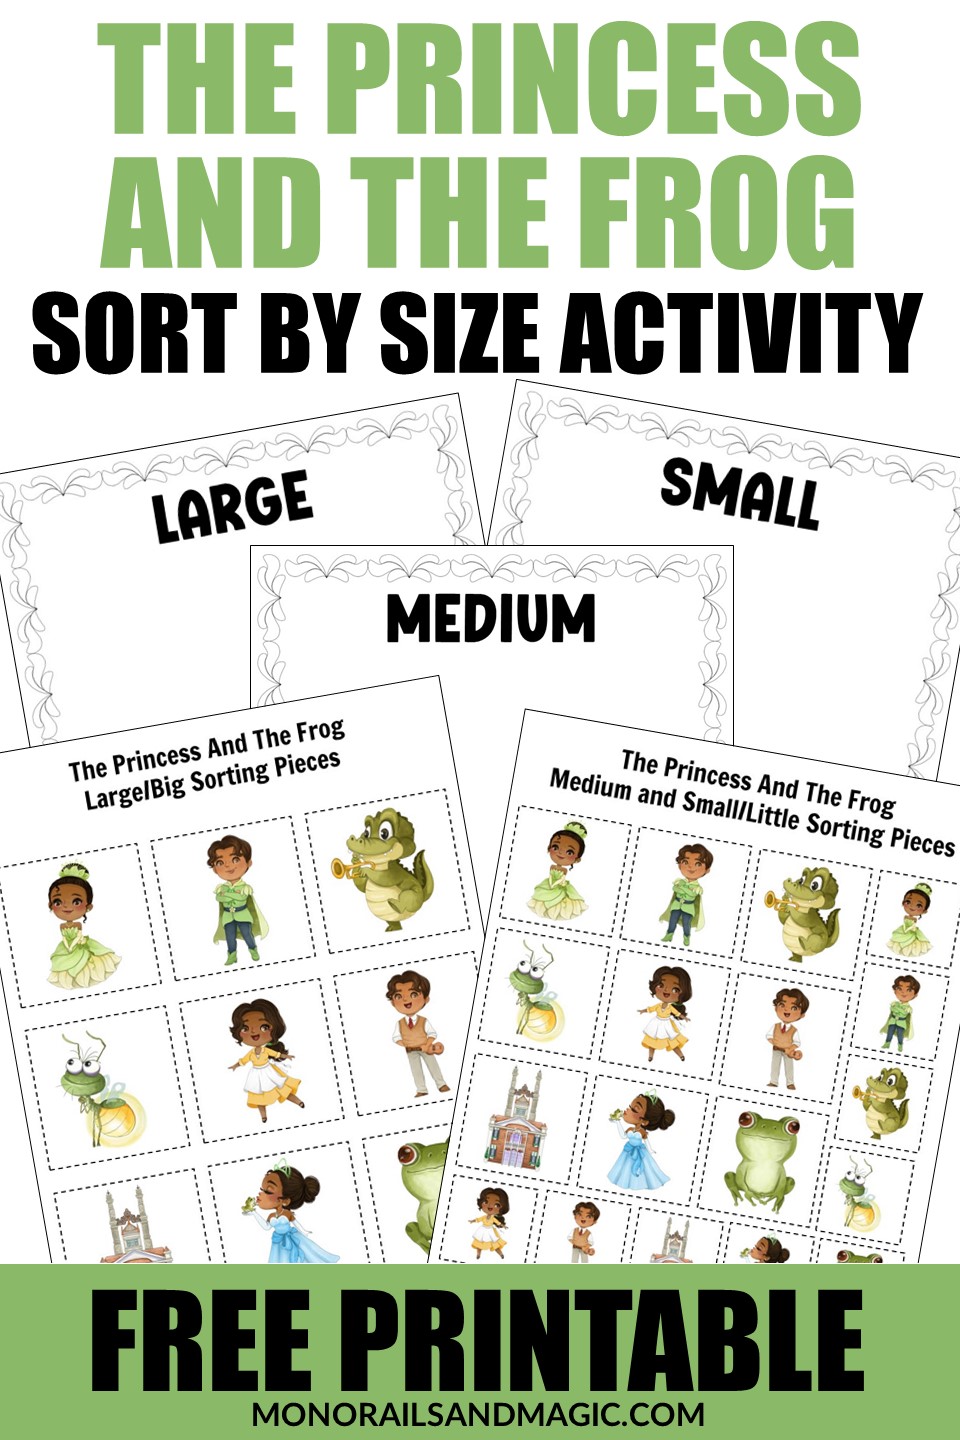 Free printable The Princess and the Frog activity for kids.